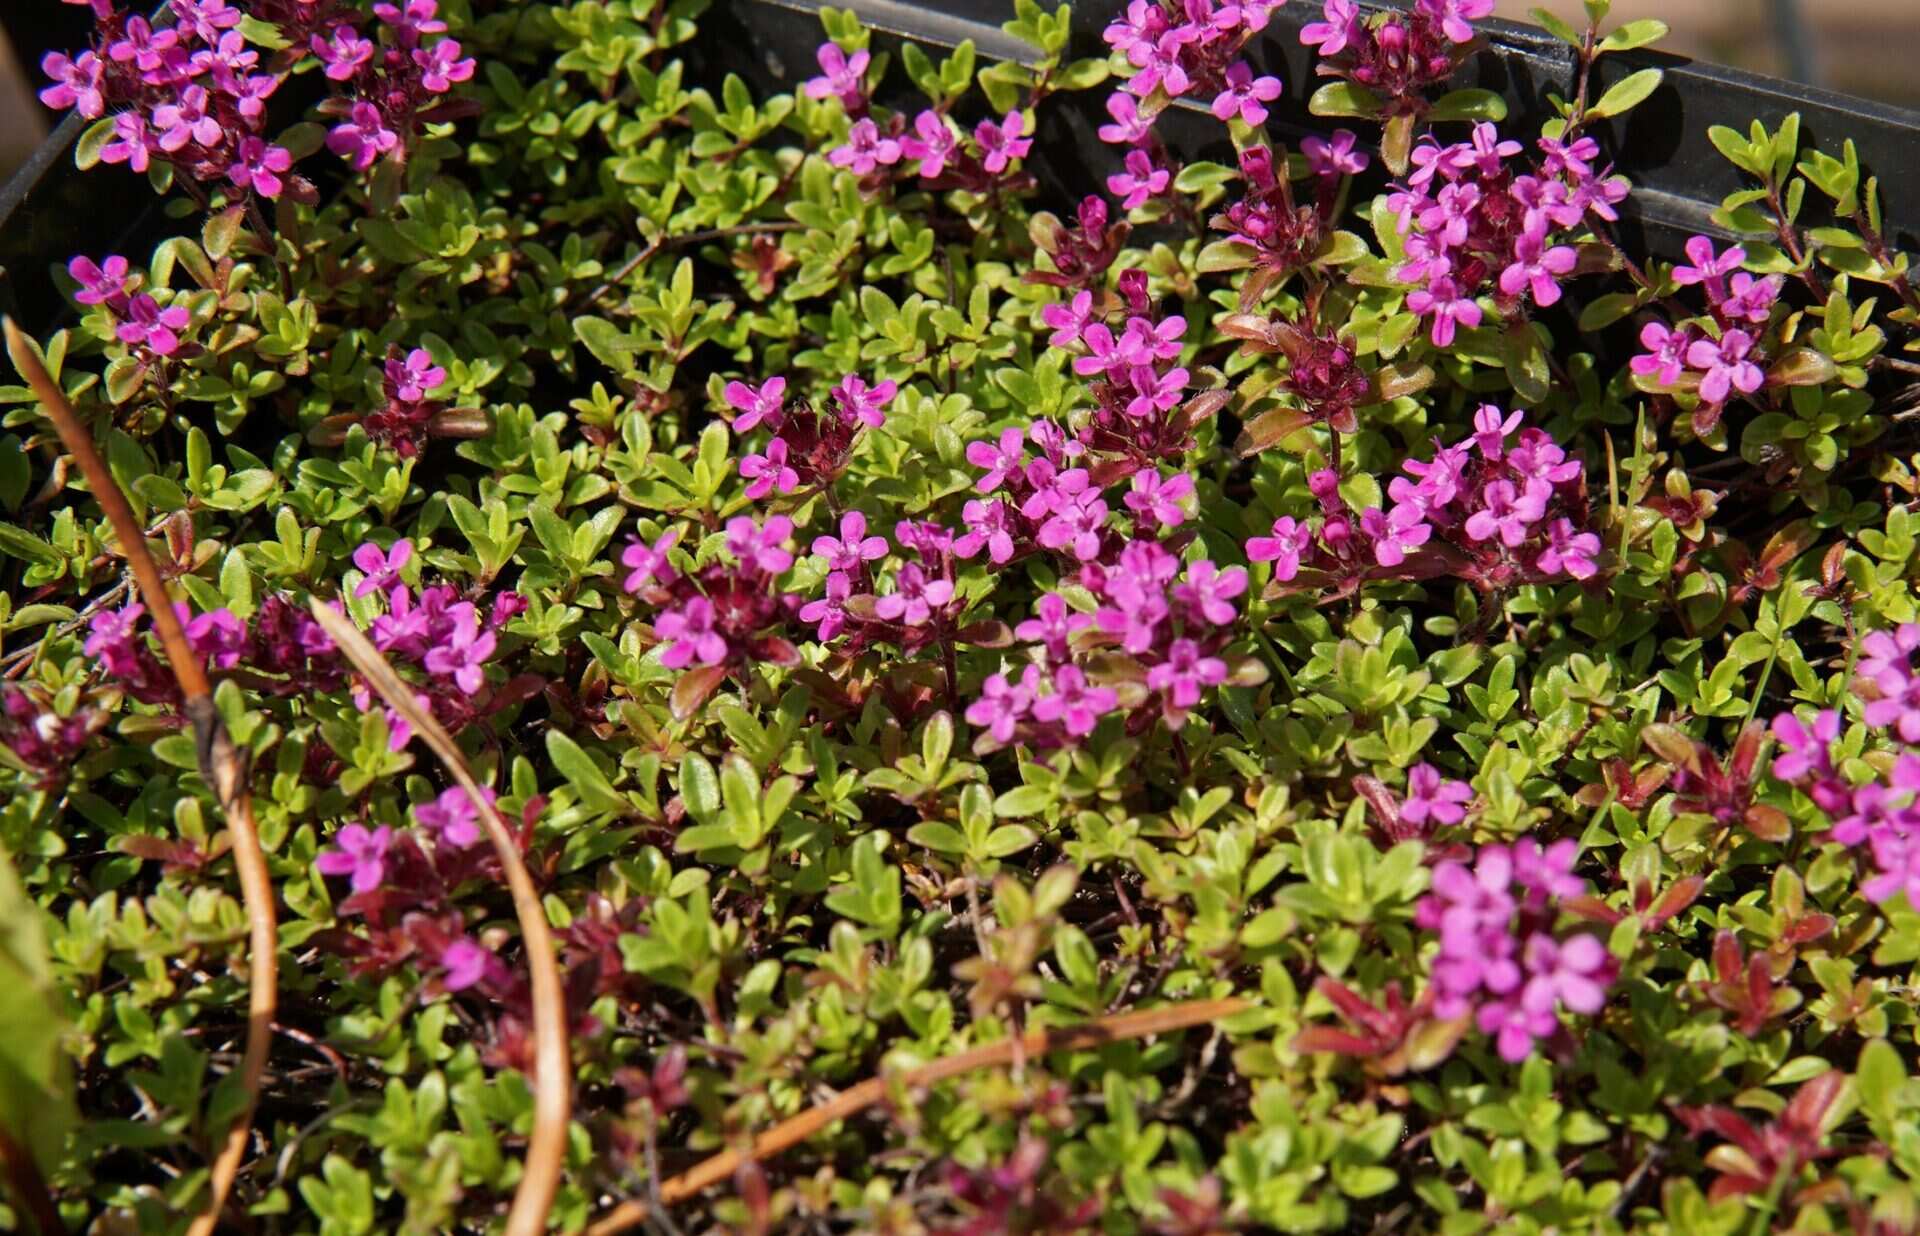 Where Can I Buy Creeping Thyme Plants